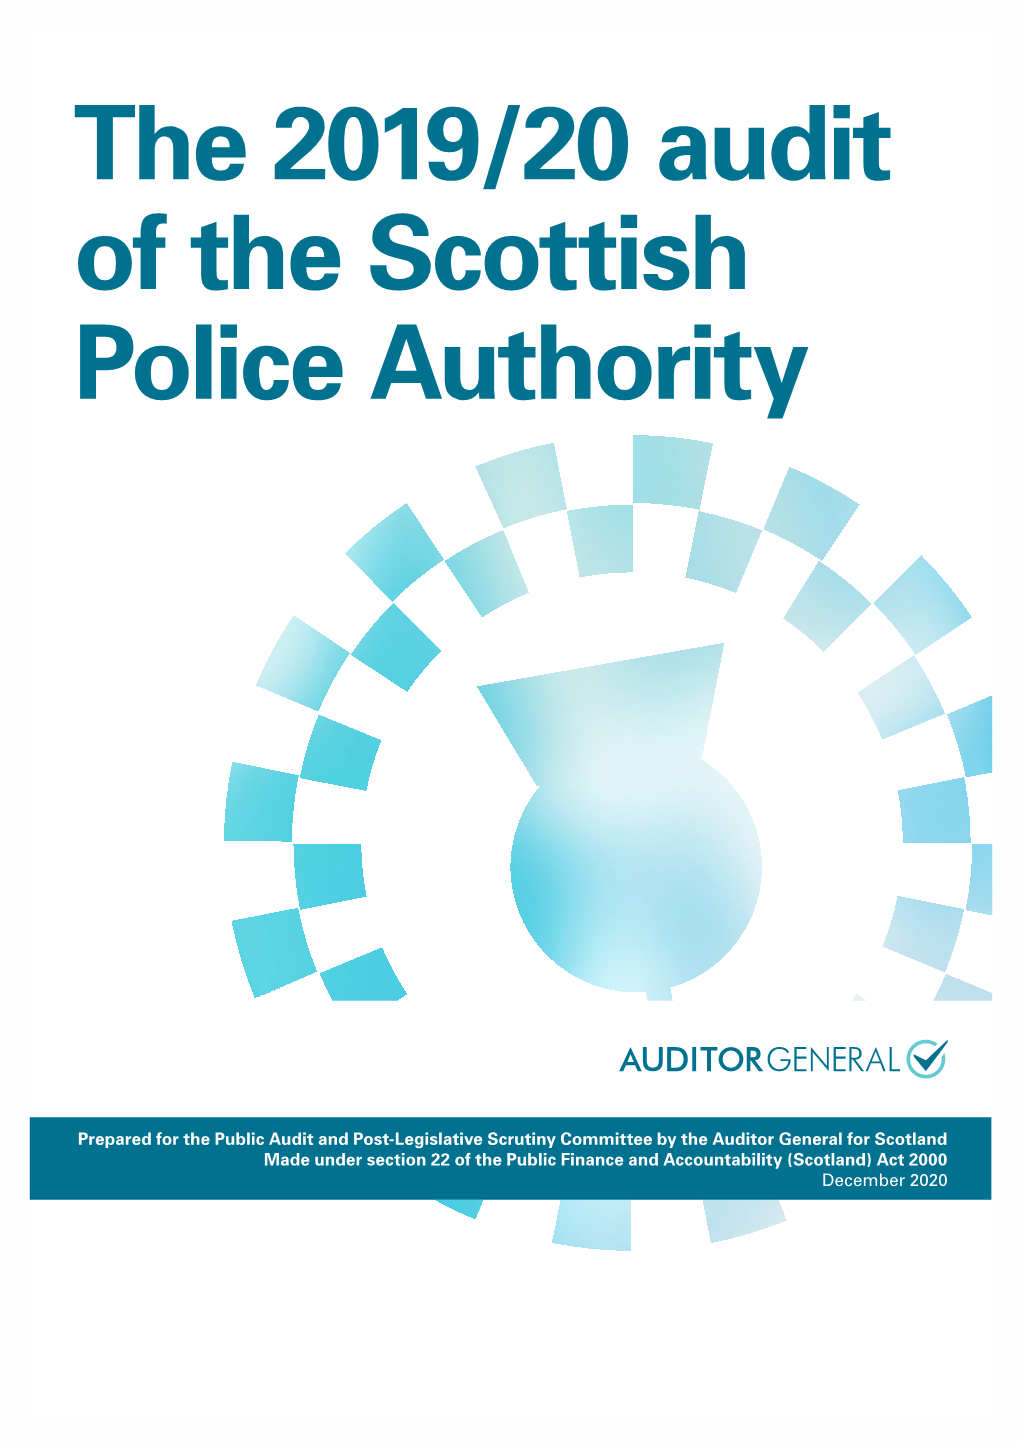 The 2019/20 Audit of the Scottish Police Authority